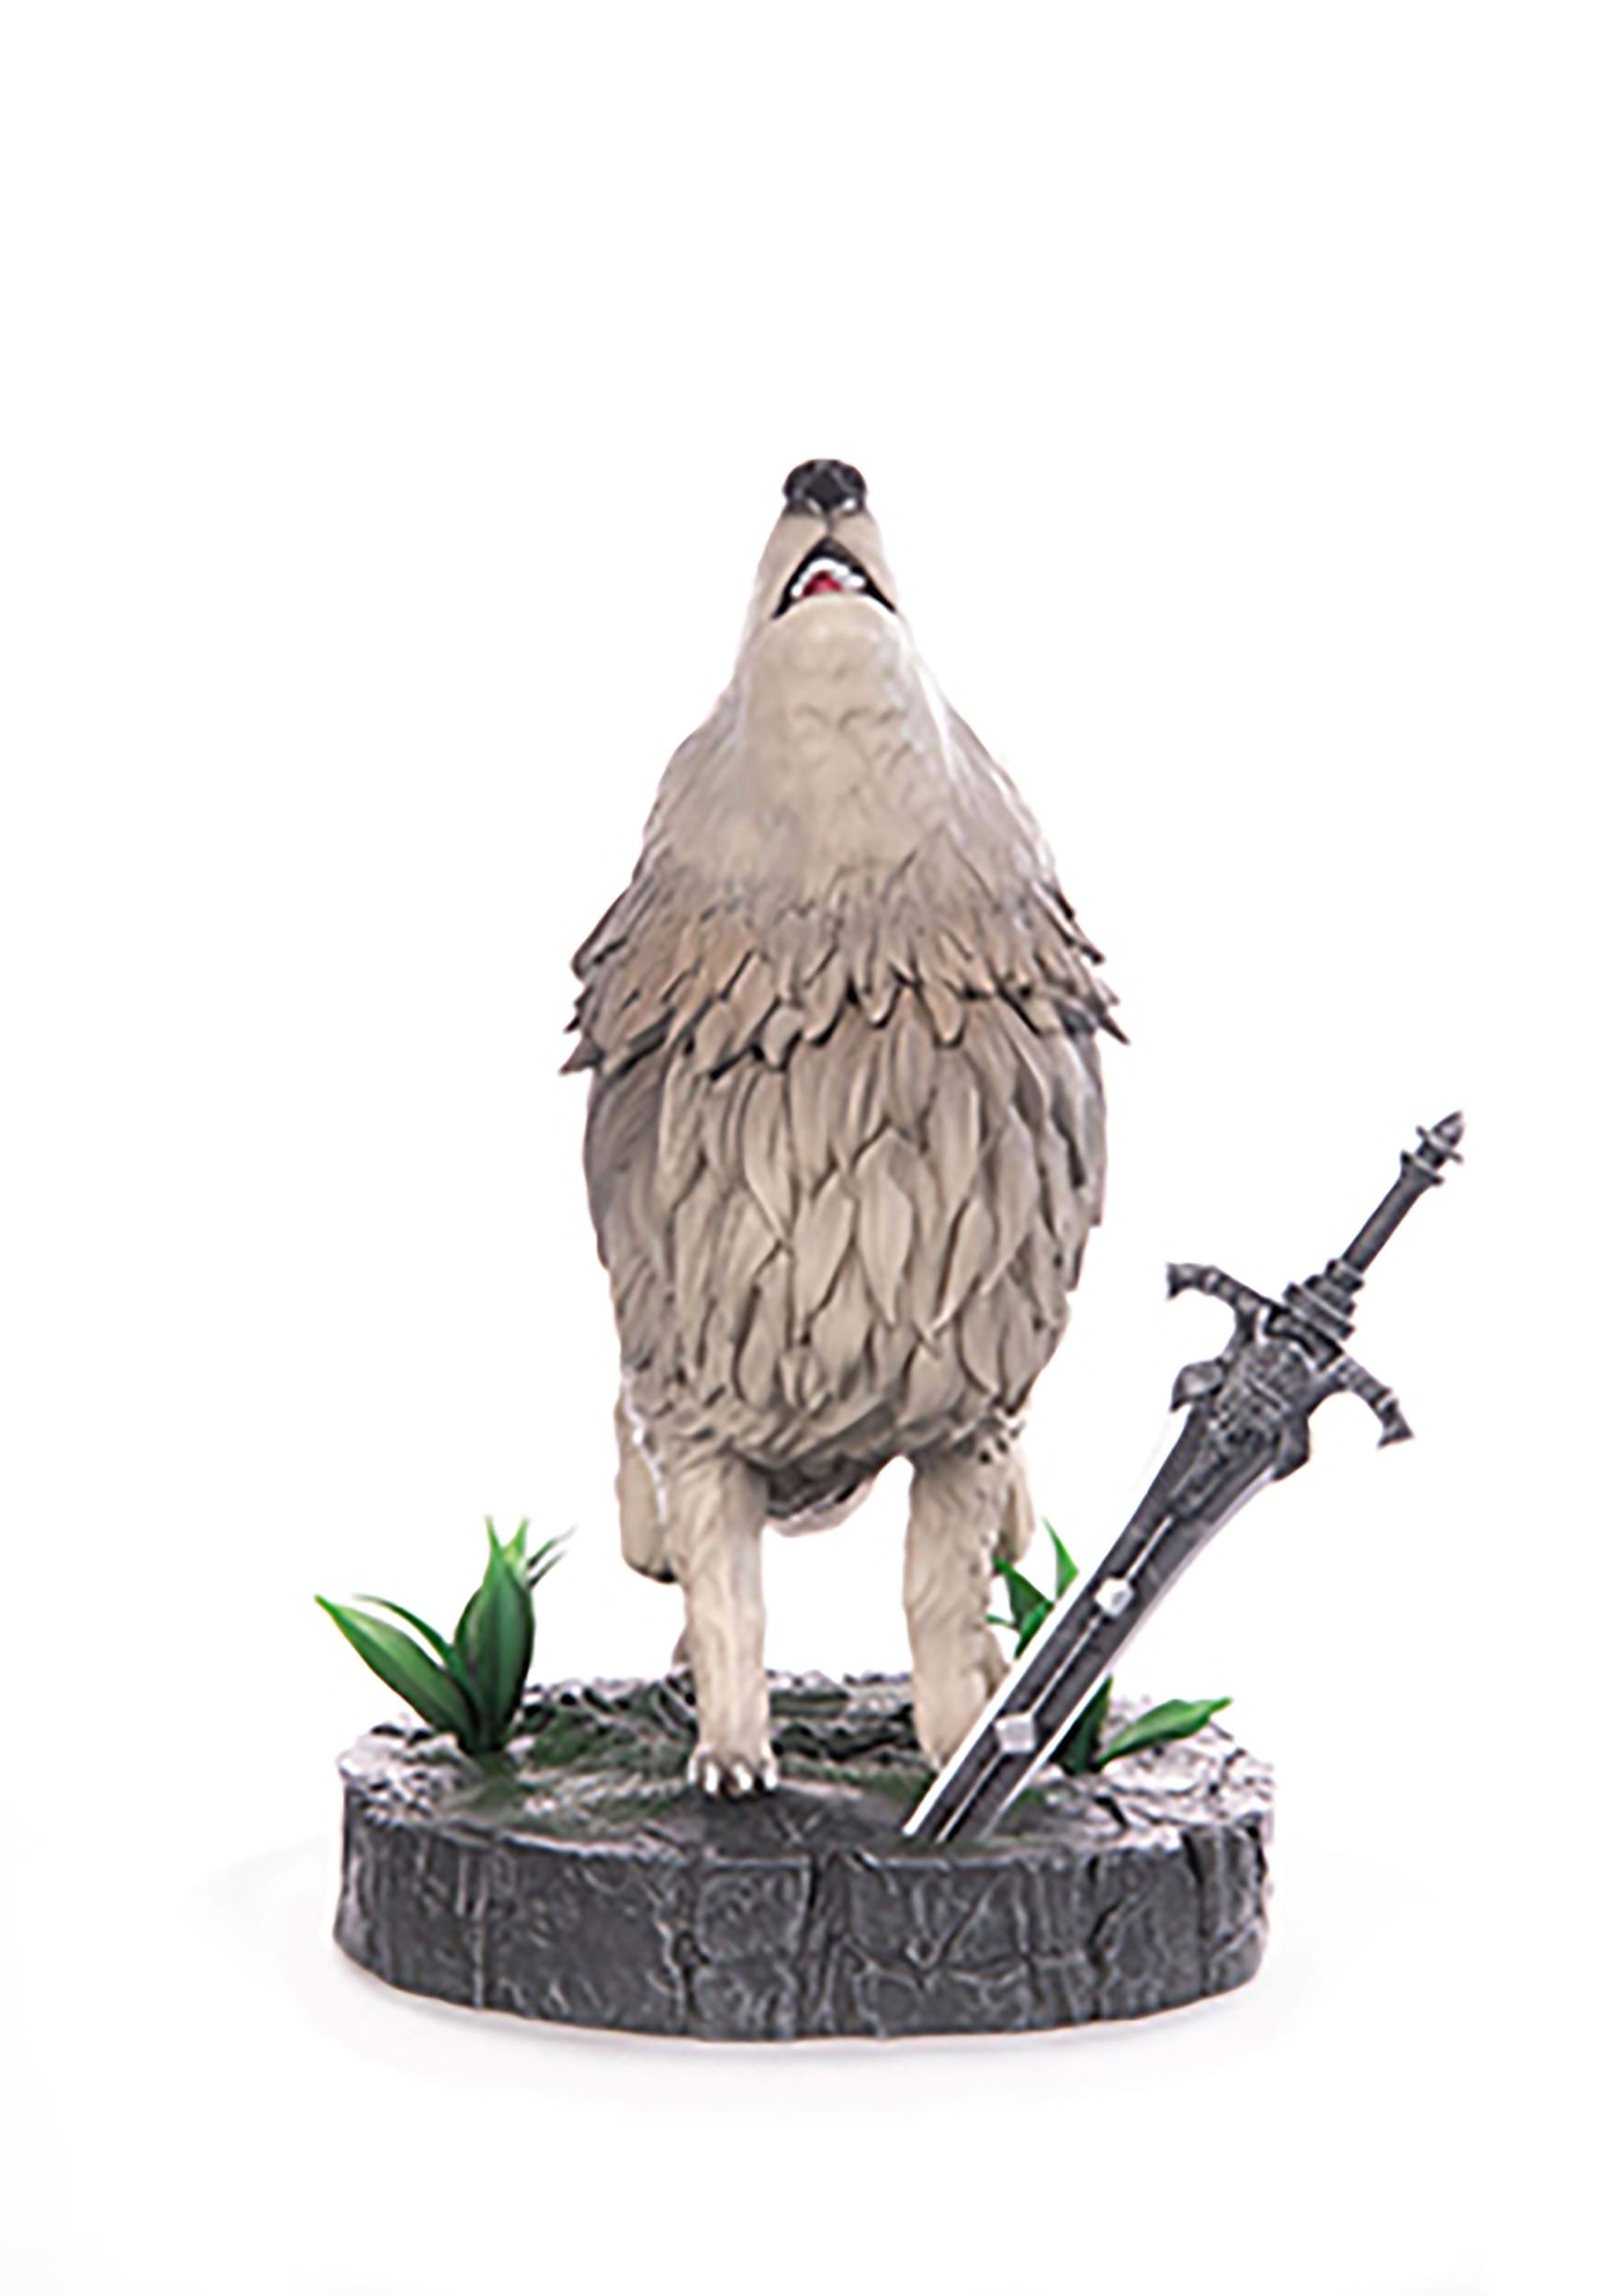 Dark Souls The Great Grey Wolf Sif SD Statue